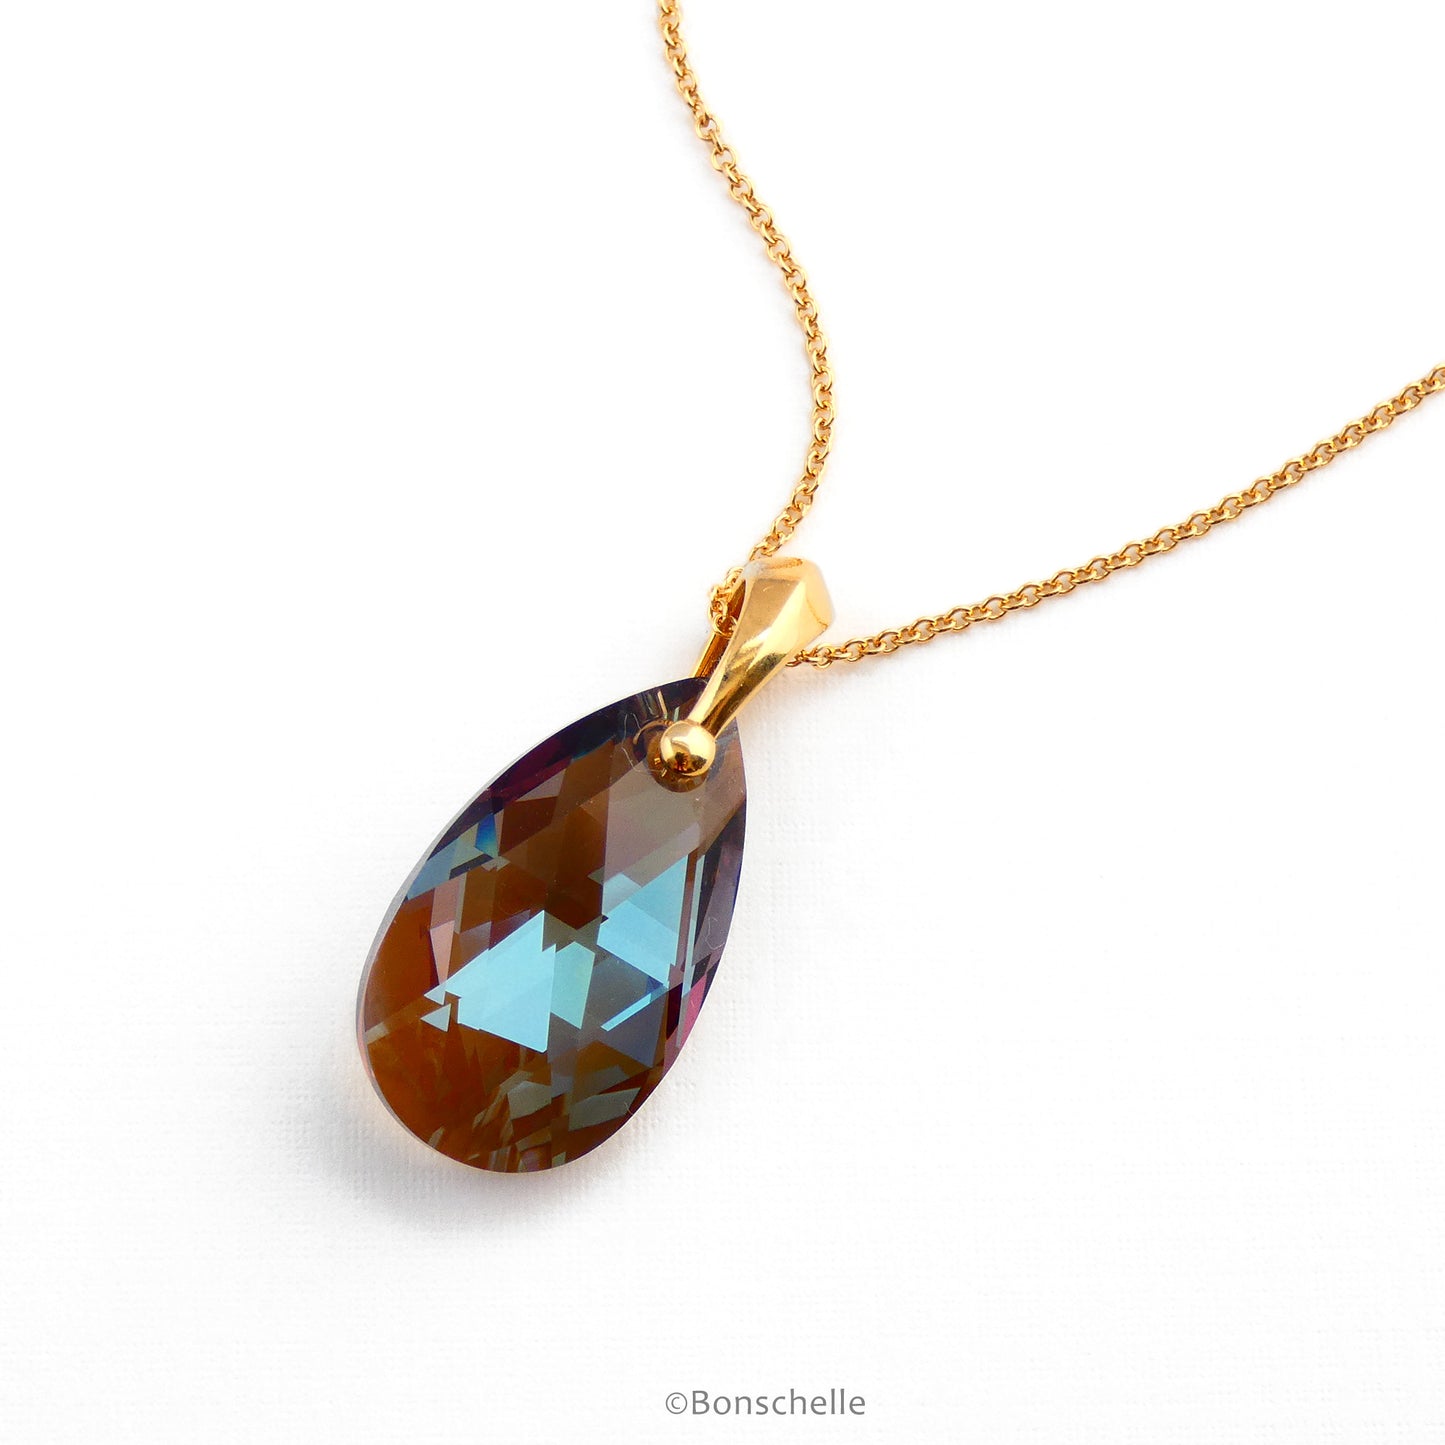 alternate view of the handmade necklace with a bronze toned teardrop shape faceted crystal bead and 14K gold filled chain for women.